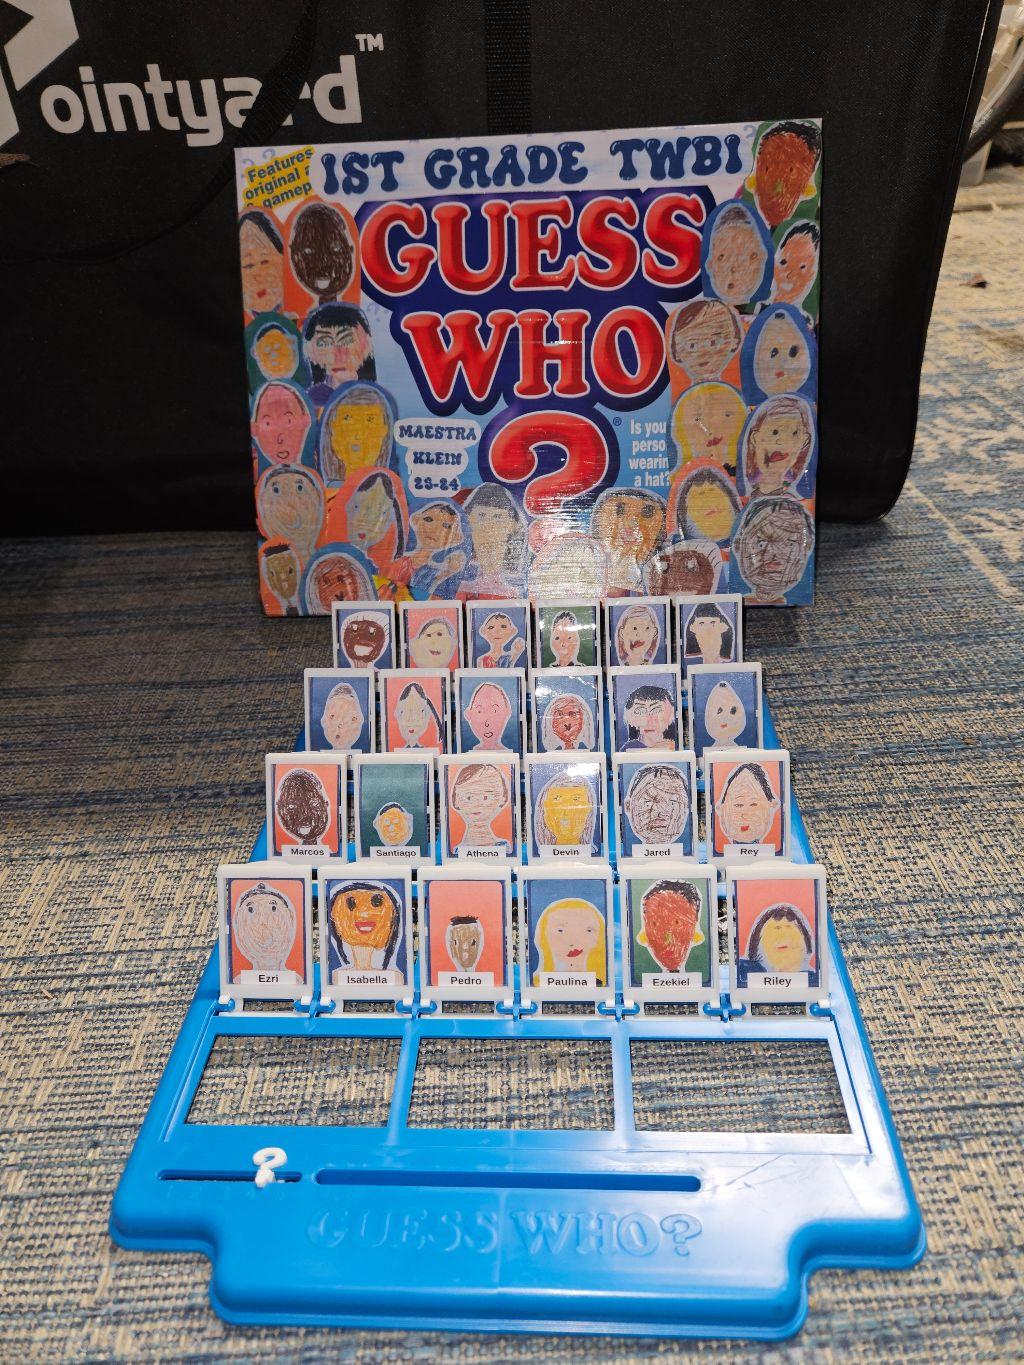 Classroom Art - Mrs. Klein's students Guess Who Game...